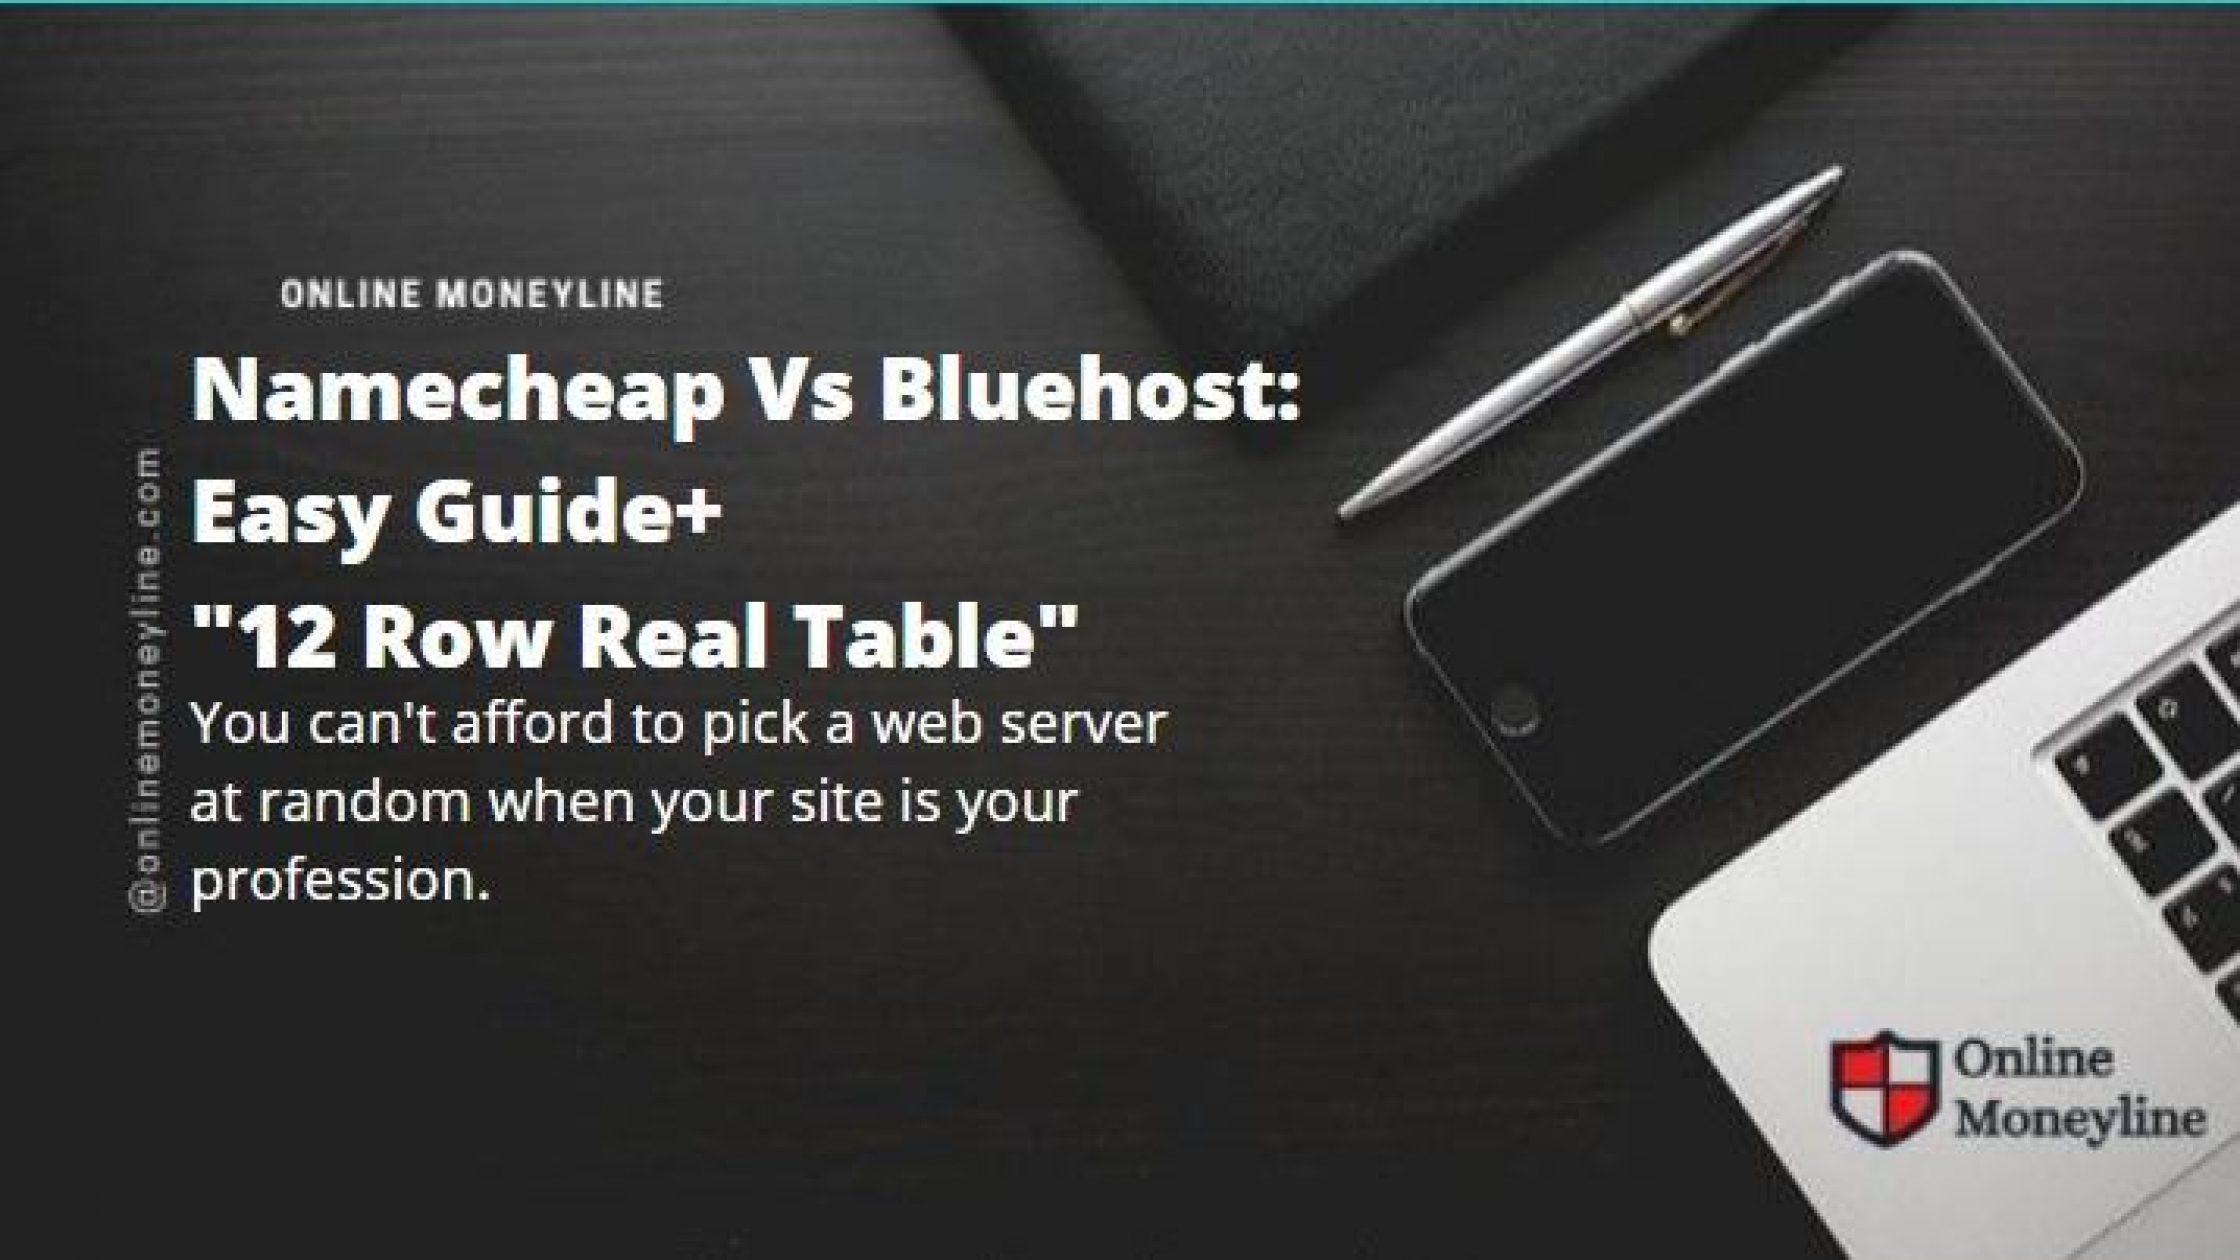 Namecheap Vs Bluehost: Easy Guide+”12 Row Real Table”